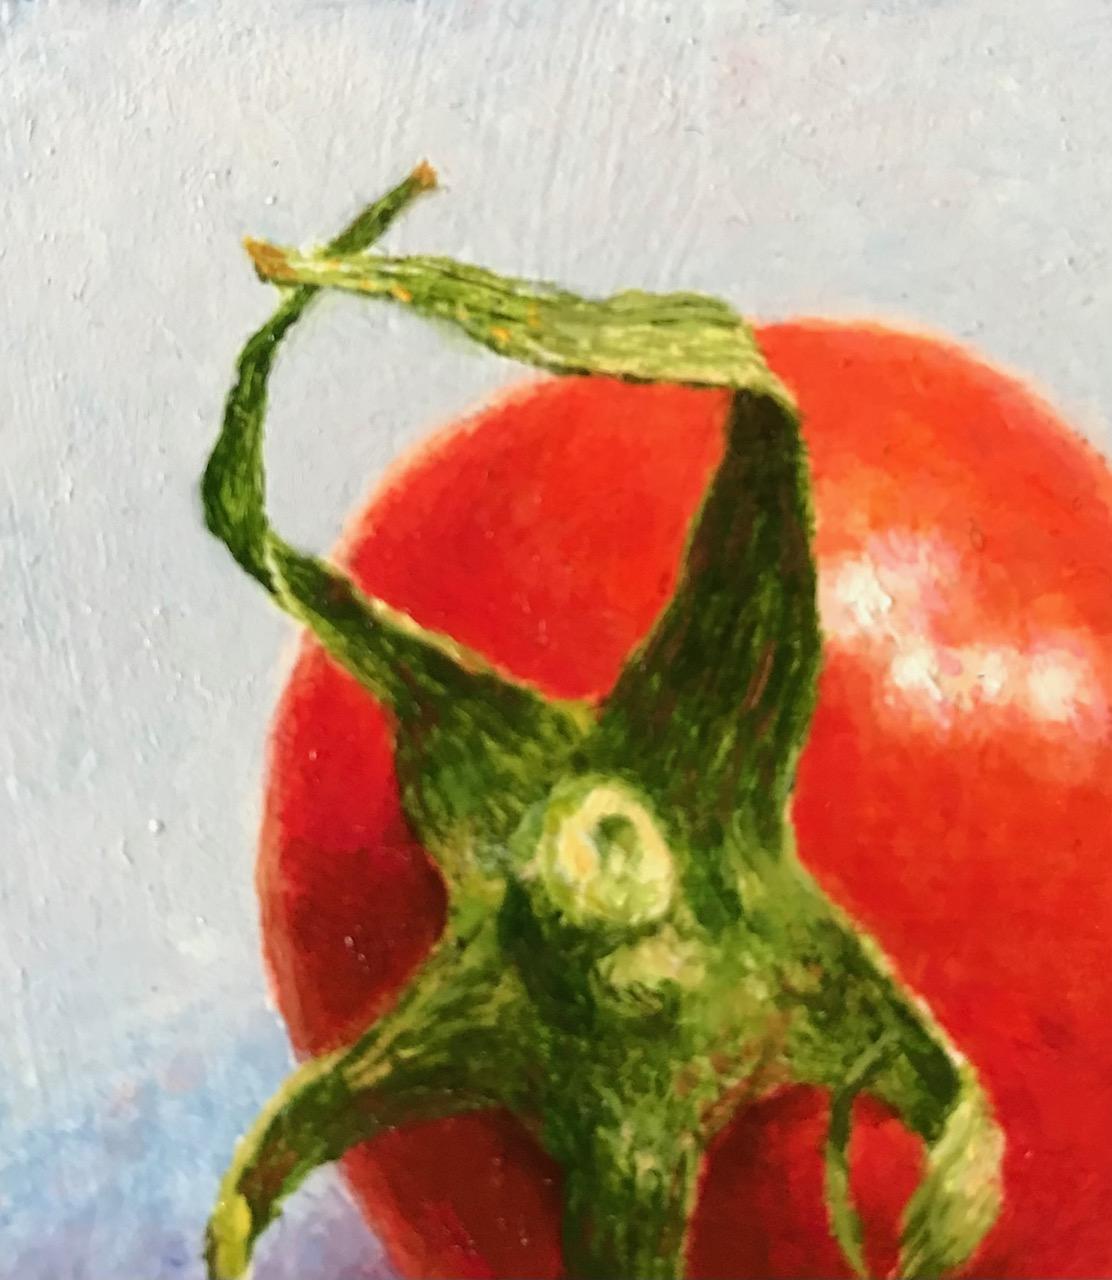 painting of tomato